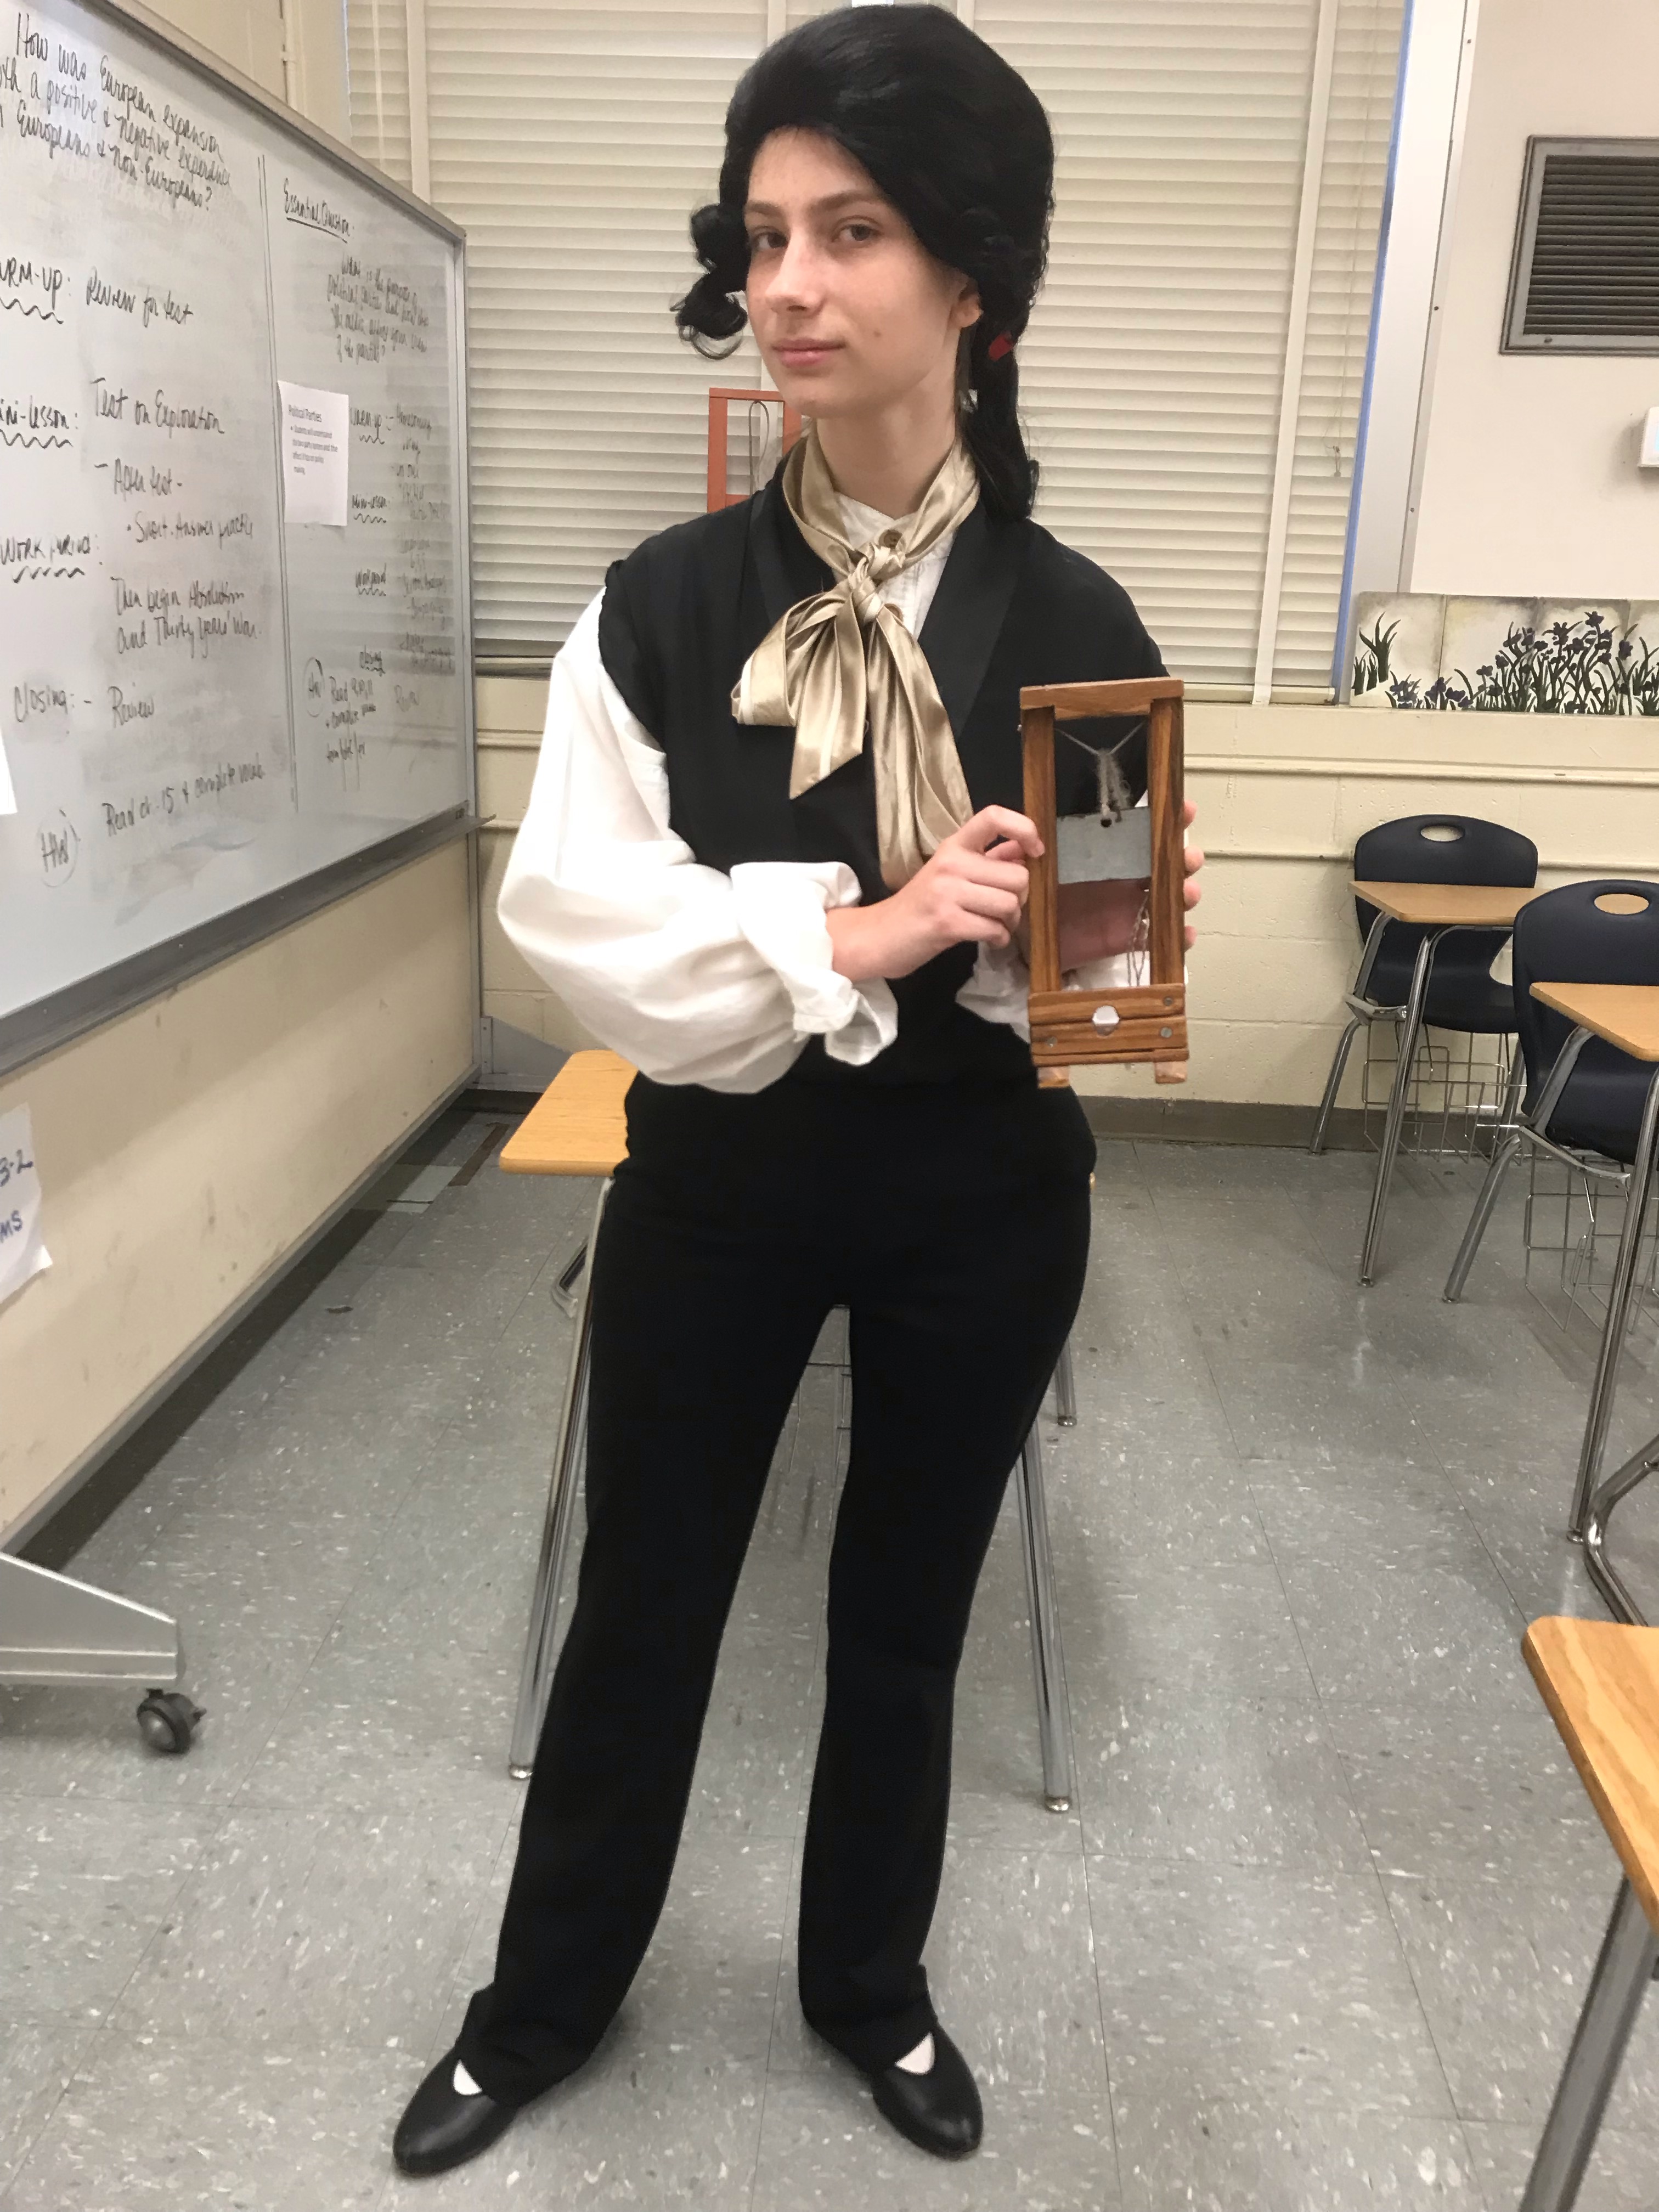 Brooke Pavek, a high school senior who uses TikTok for funny videos about history, dresses up as Maximilien Robespierre, an important figure in the French Revolution. (Courtesy Brooke Pavek)